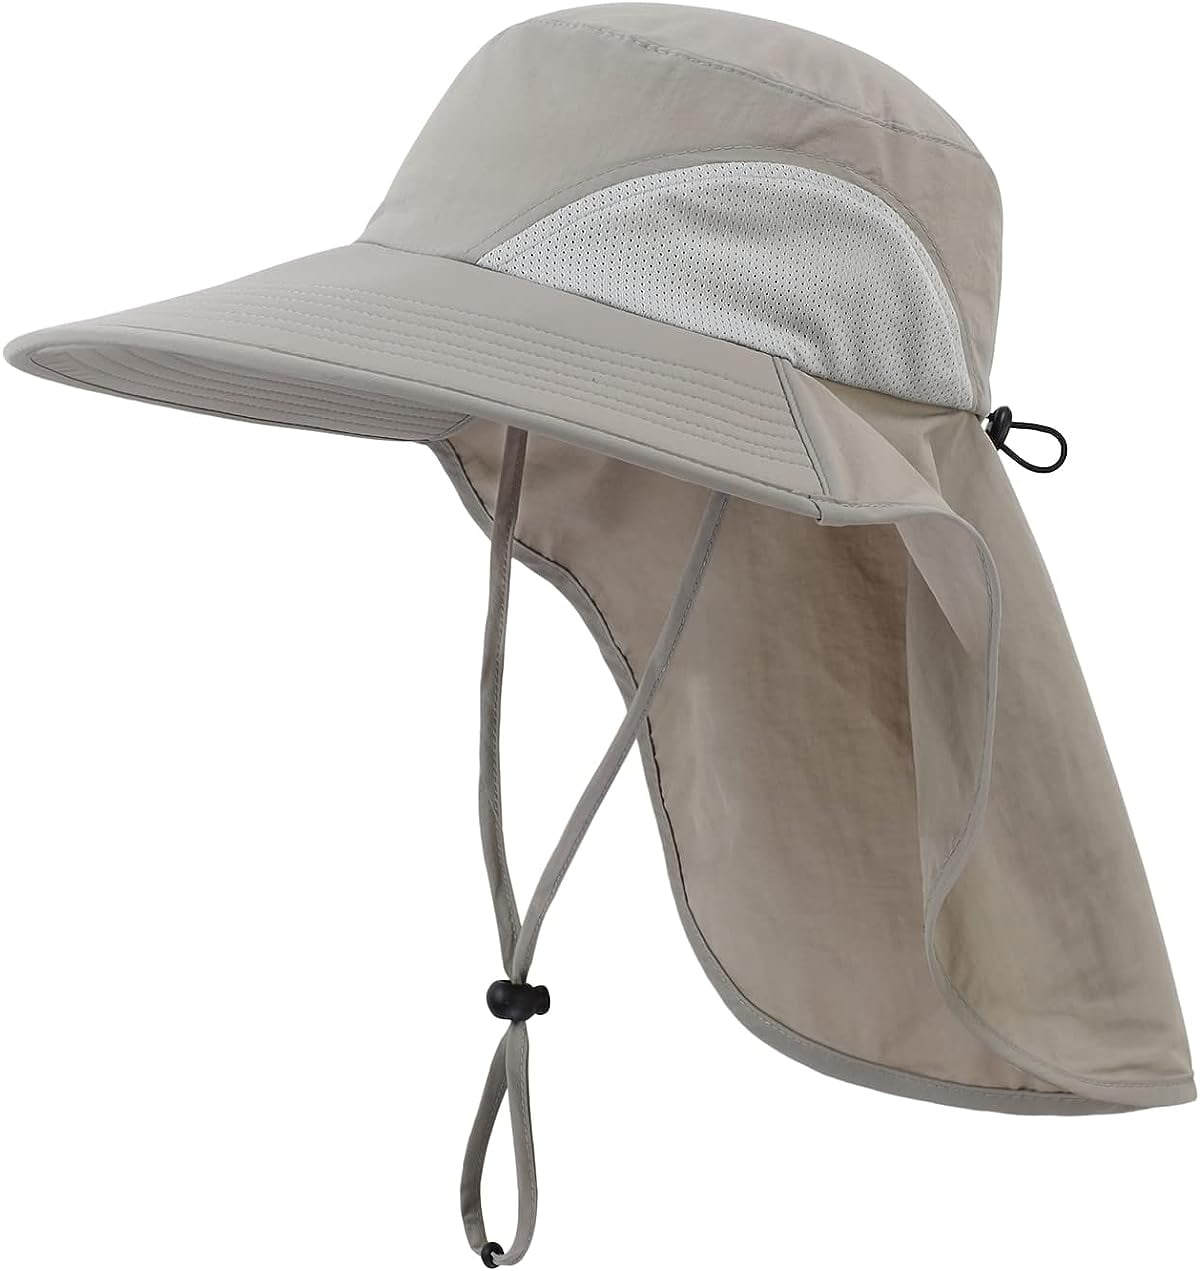 Eccomum Wide Brim Sun Hat with Detachable Neck Flap and Face Cover Men Women Fishing Outdoor Travel Hat, Men's, Size: One size, Gray